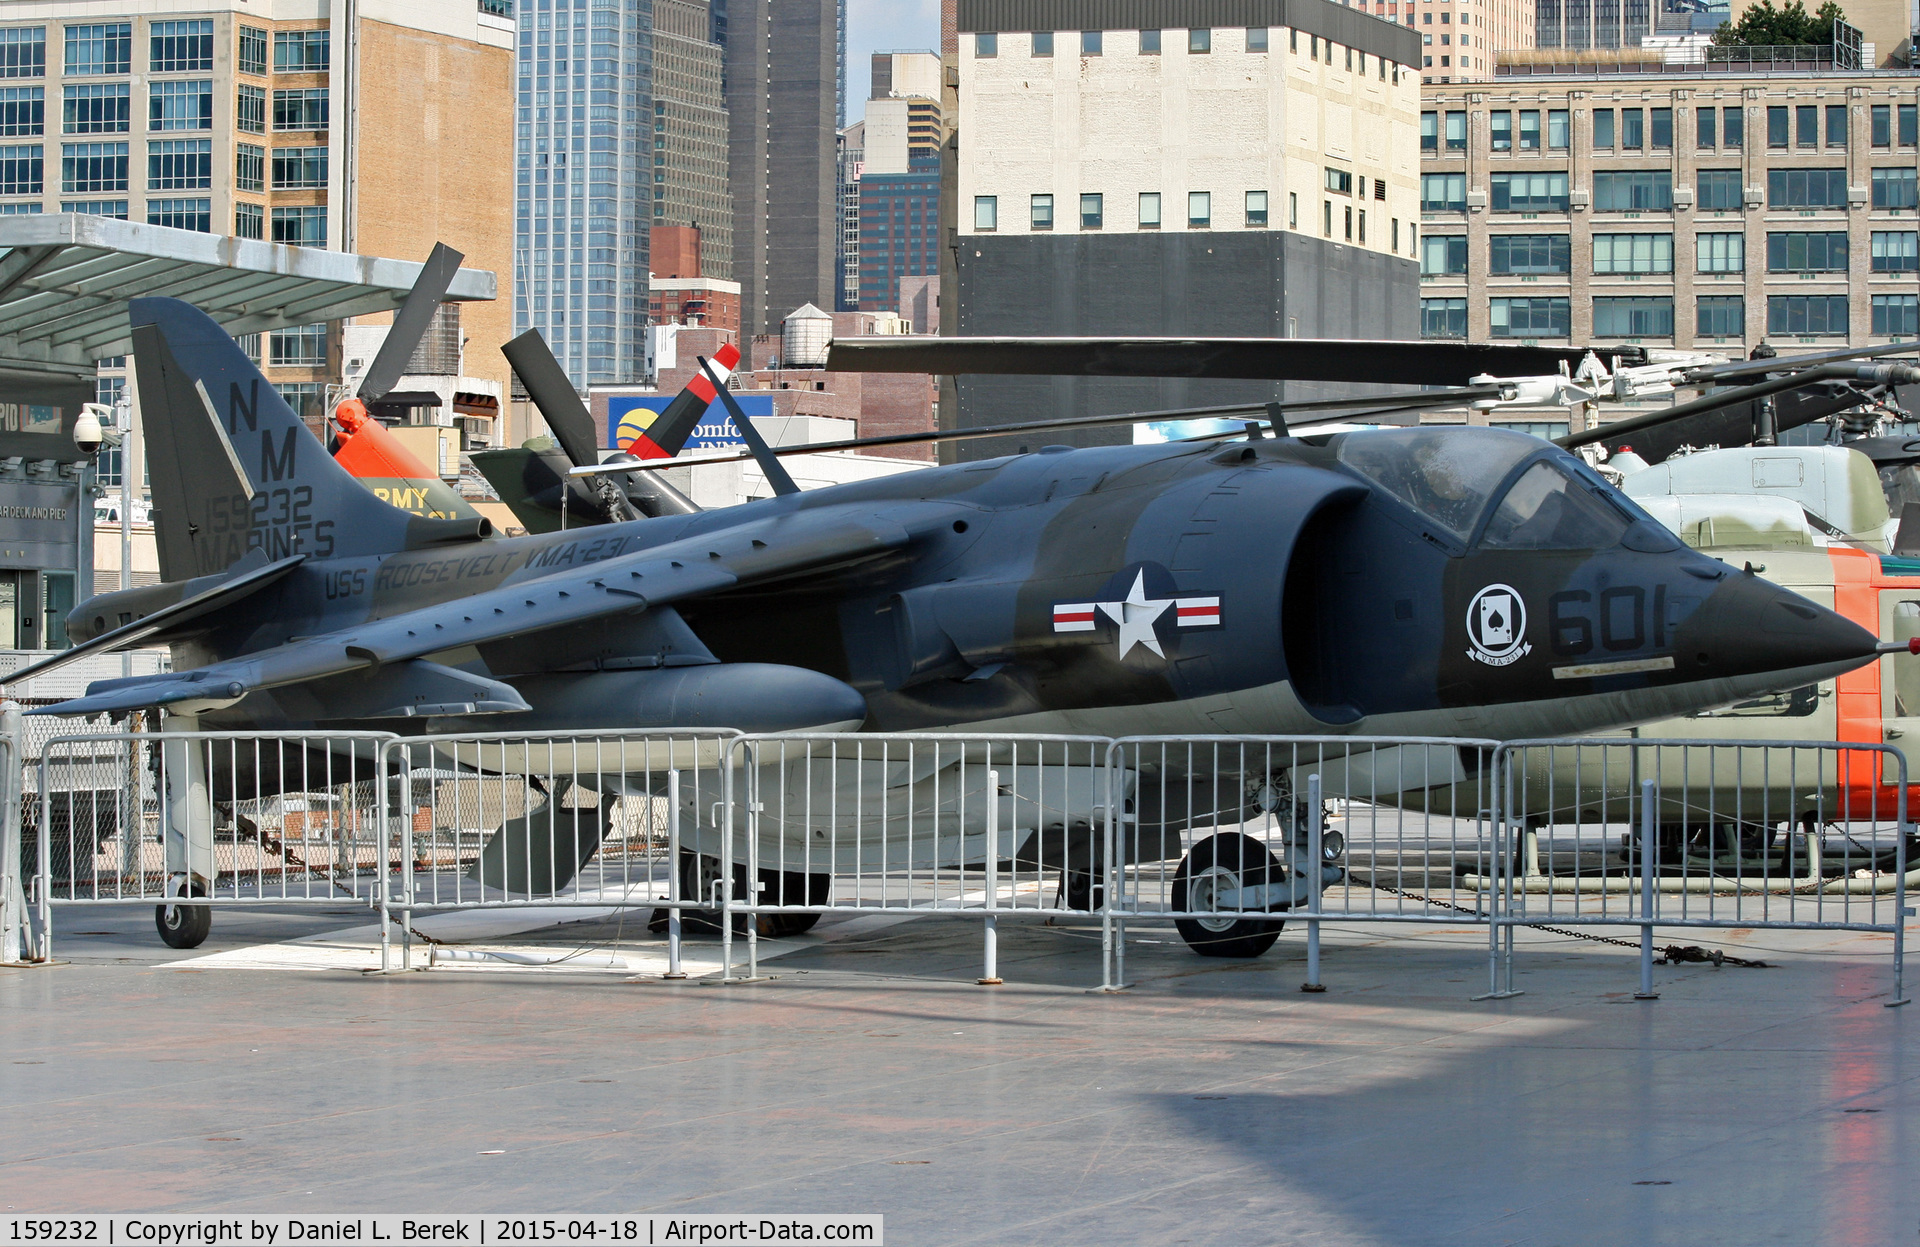 159232, Hawker Siddeley AV-8C Harrier C/N 712141, I find the Harrier to be an exceptionally photogenic aircraft.  This example is on board the U.S.S. Intrepid, New York City.